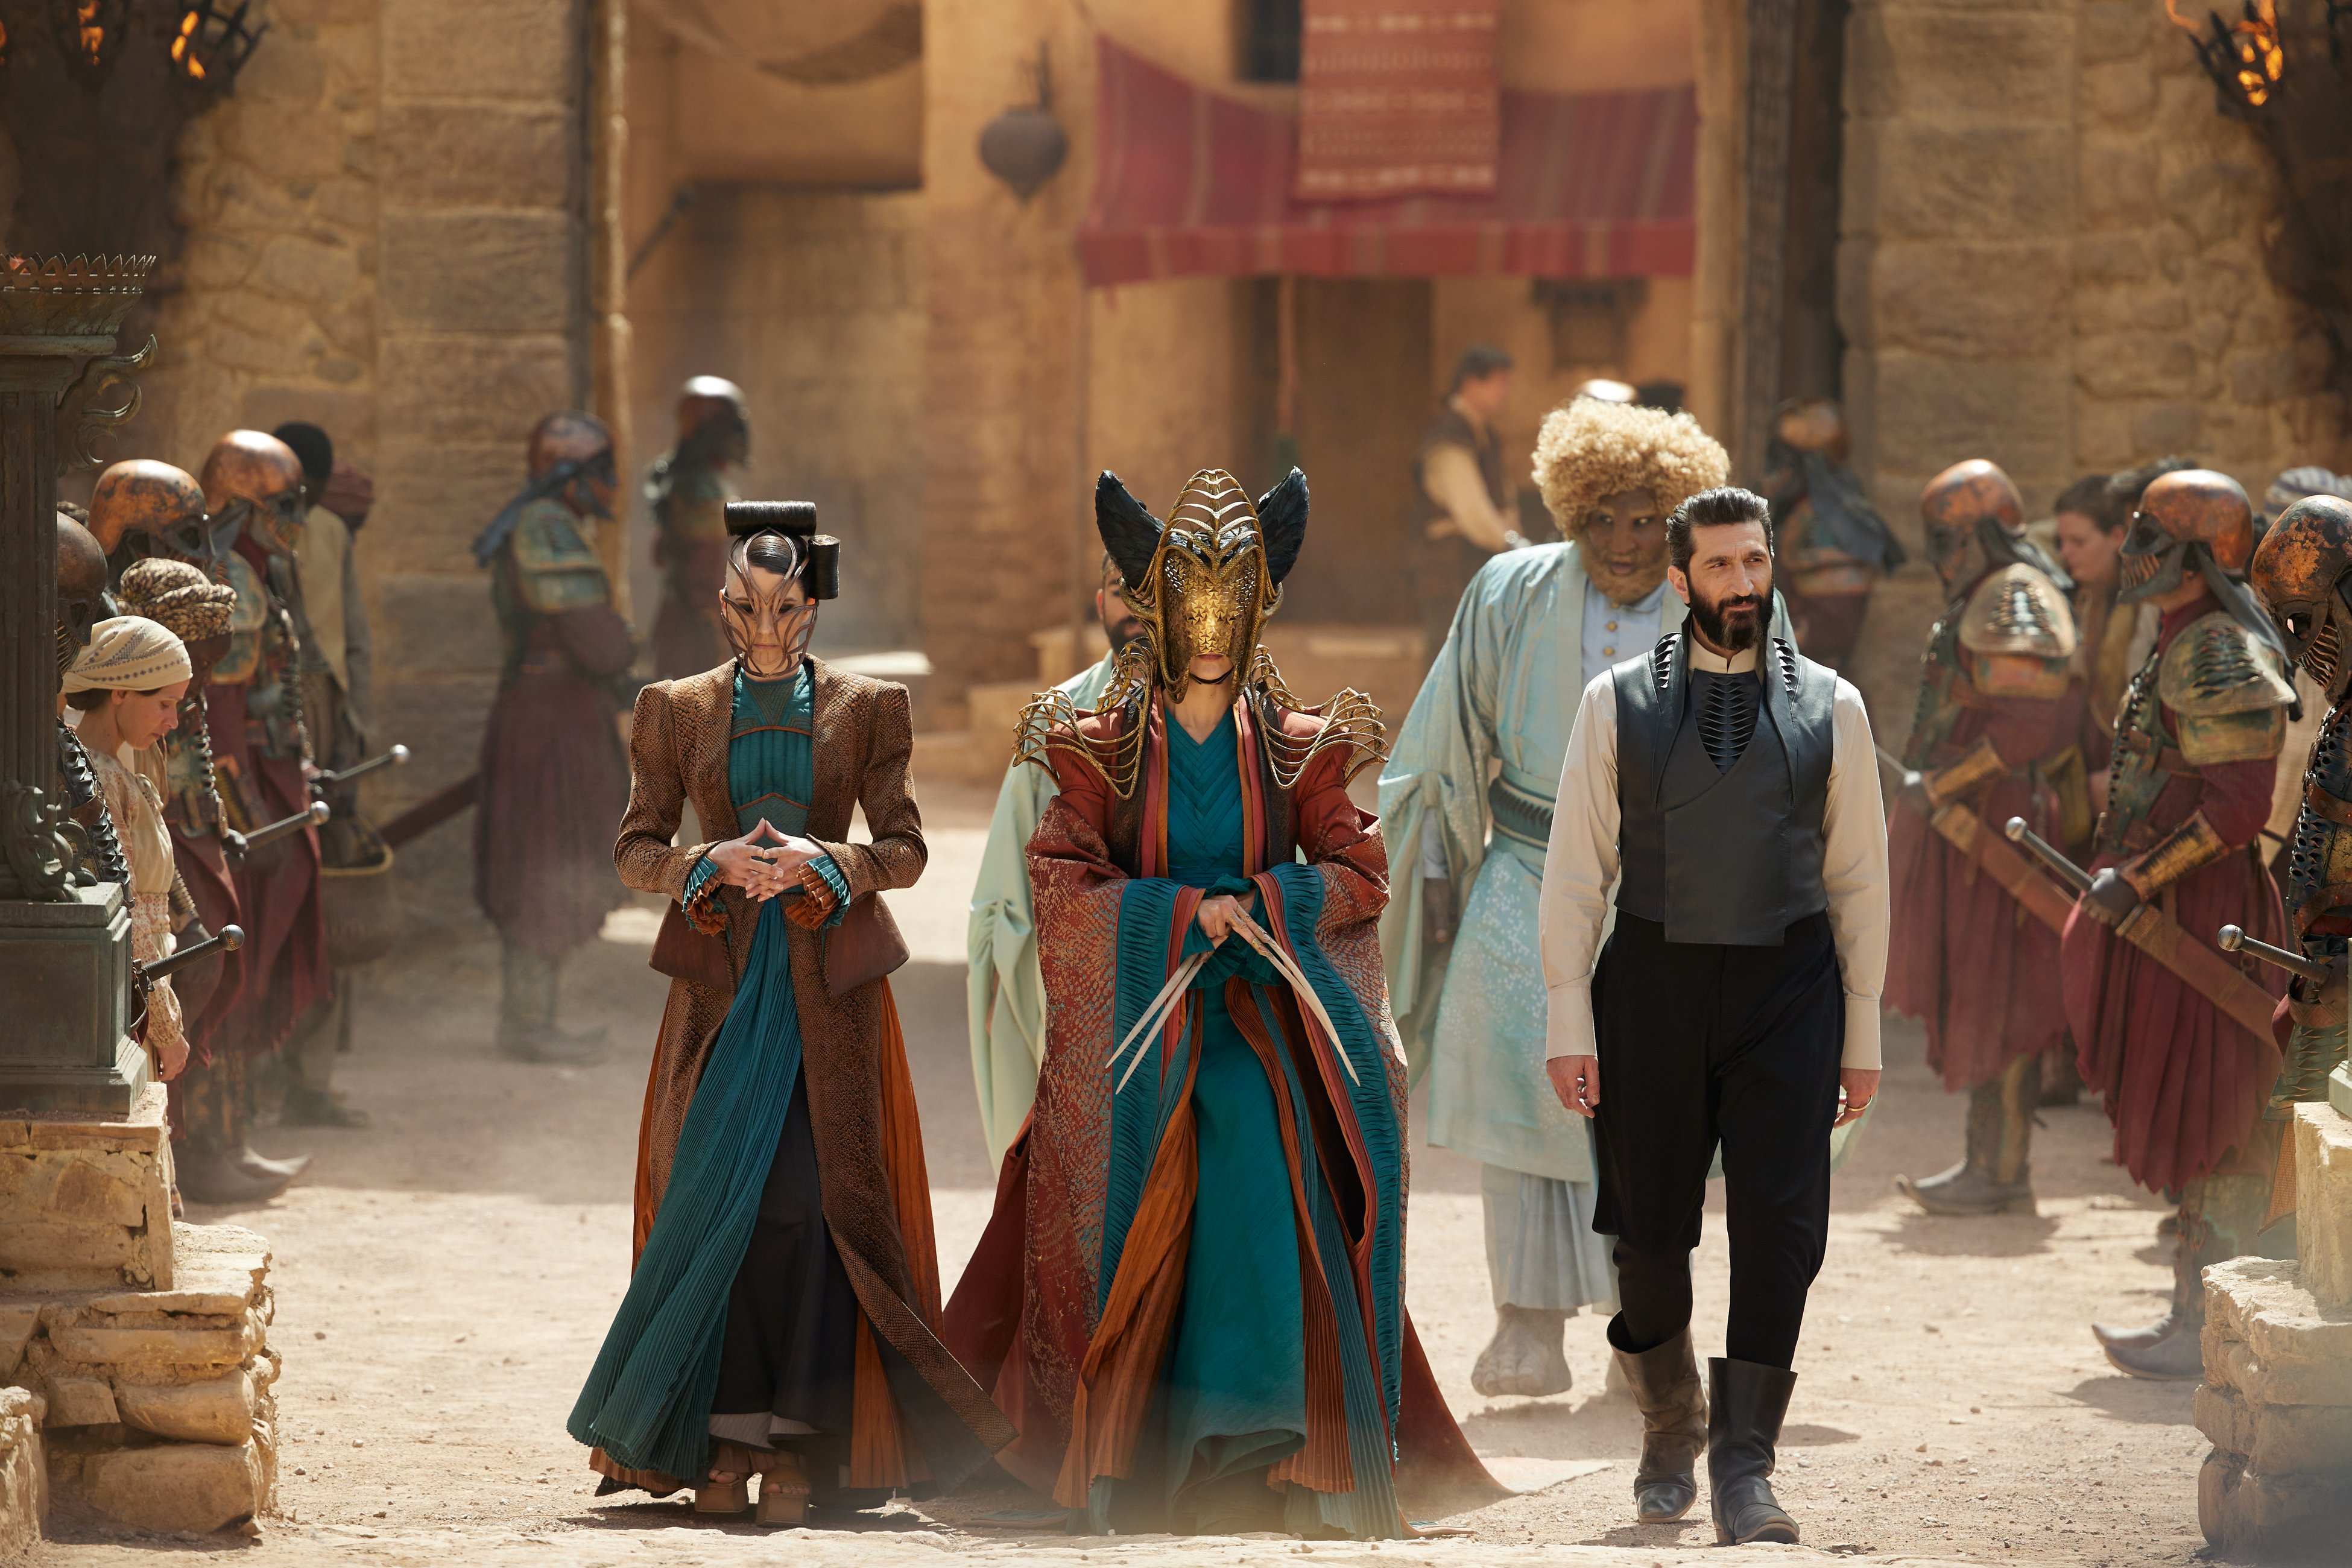 Full shot of five figures walking in formation, watched by a crowd. The central figure wears an ornate metal headpiece and has very long nails.